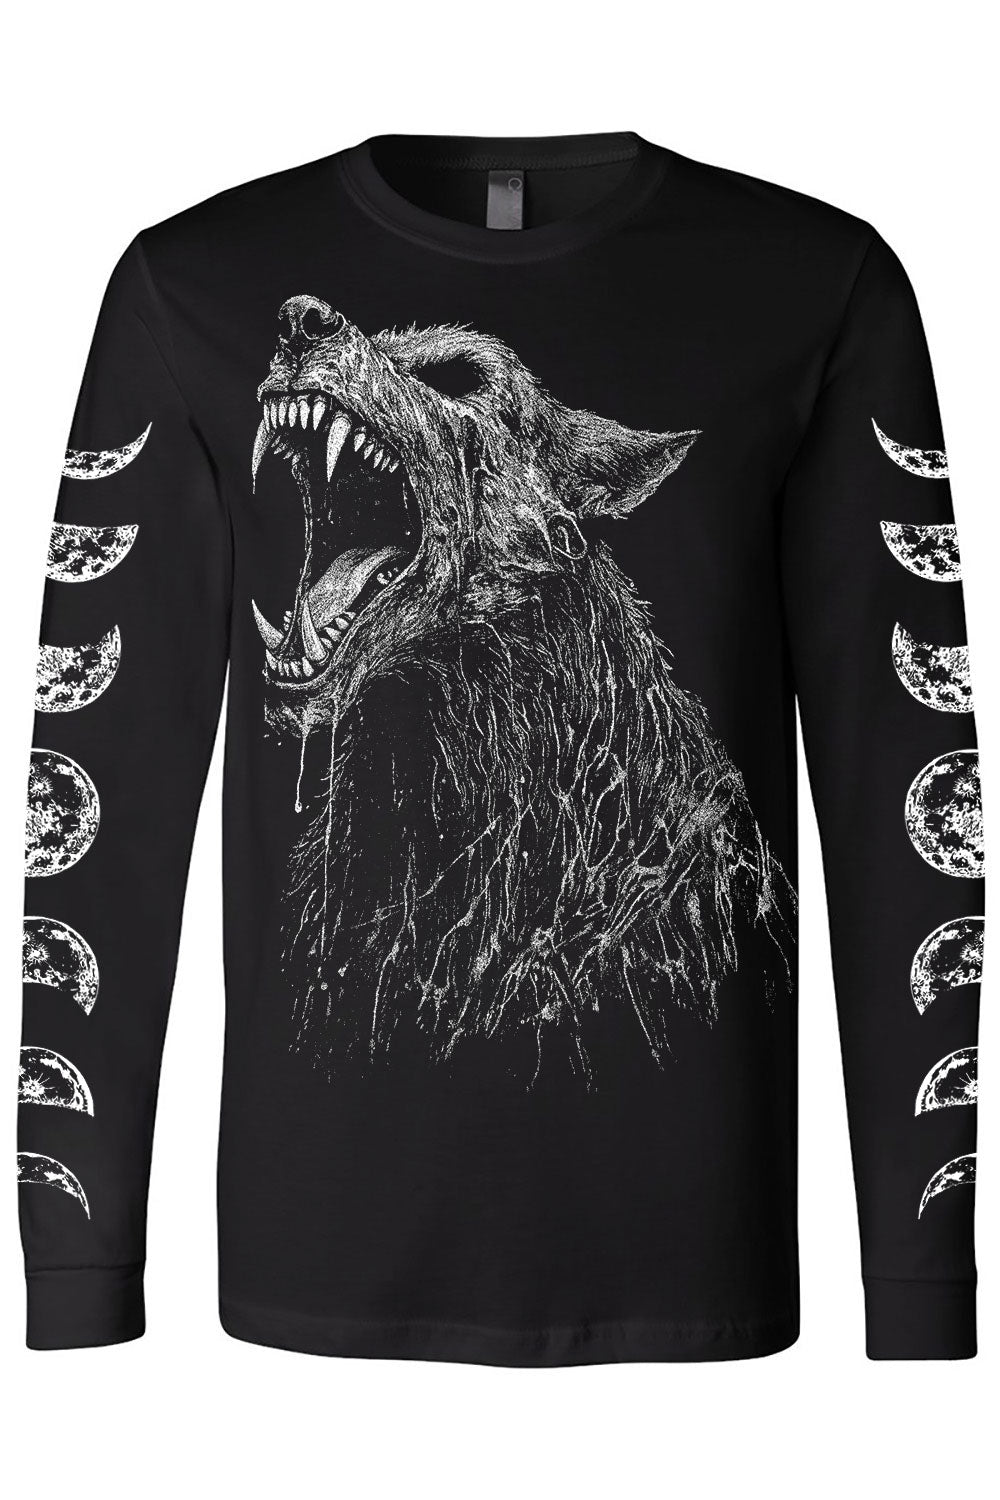 Lycanthrope Tee [Multiple Styles Available]